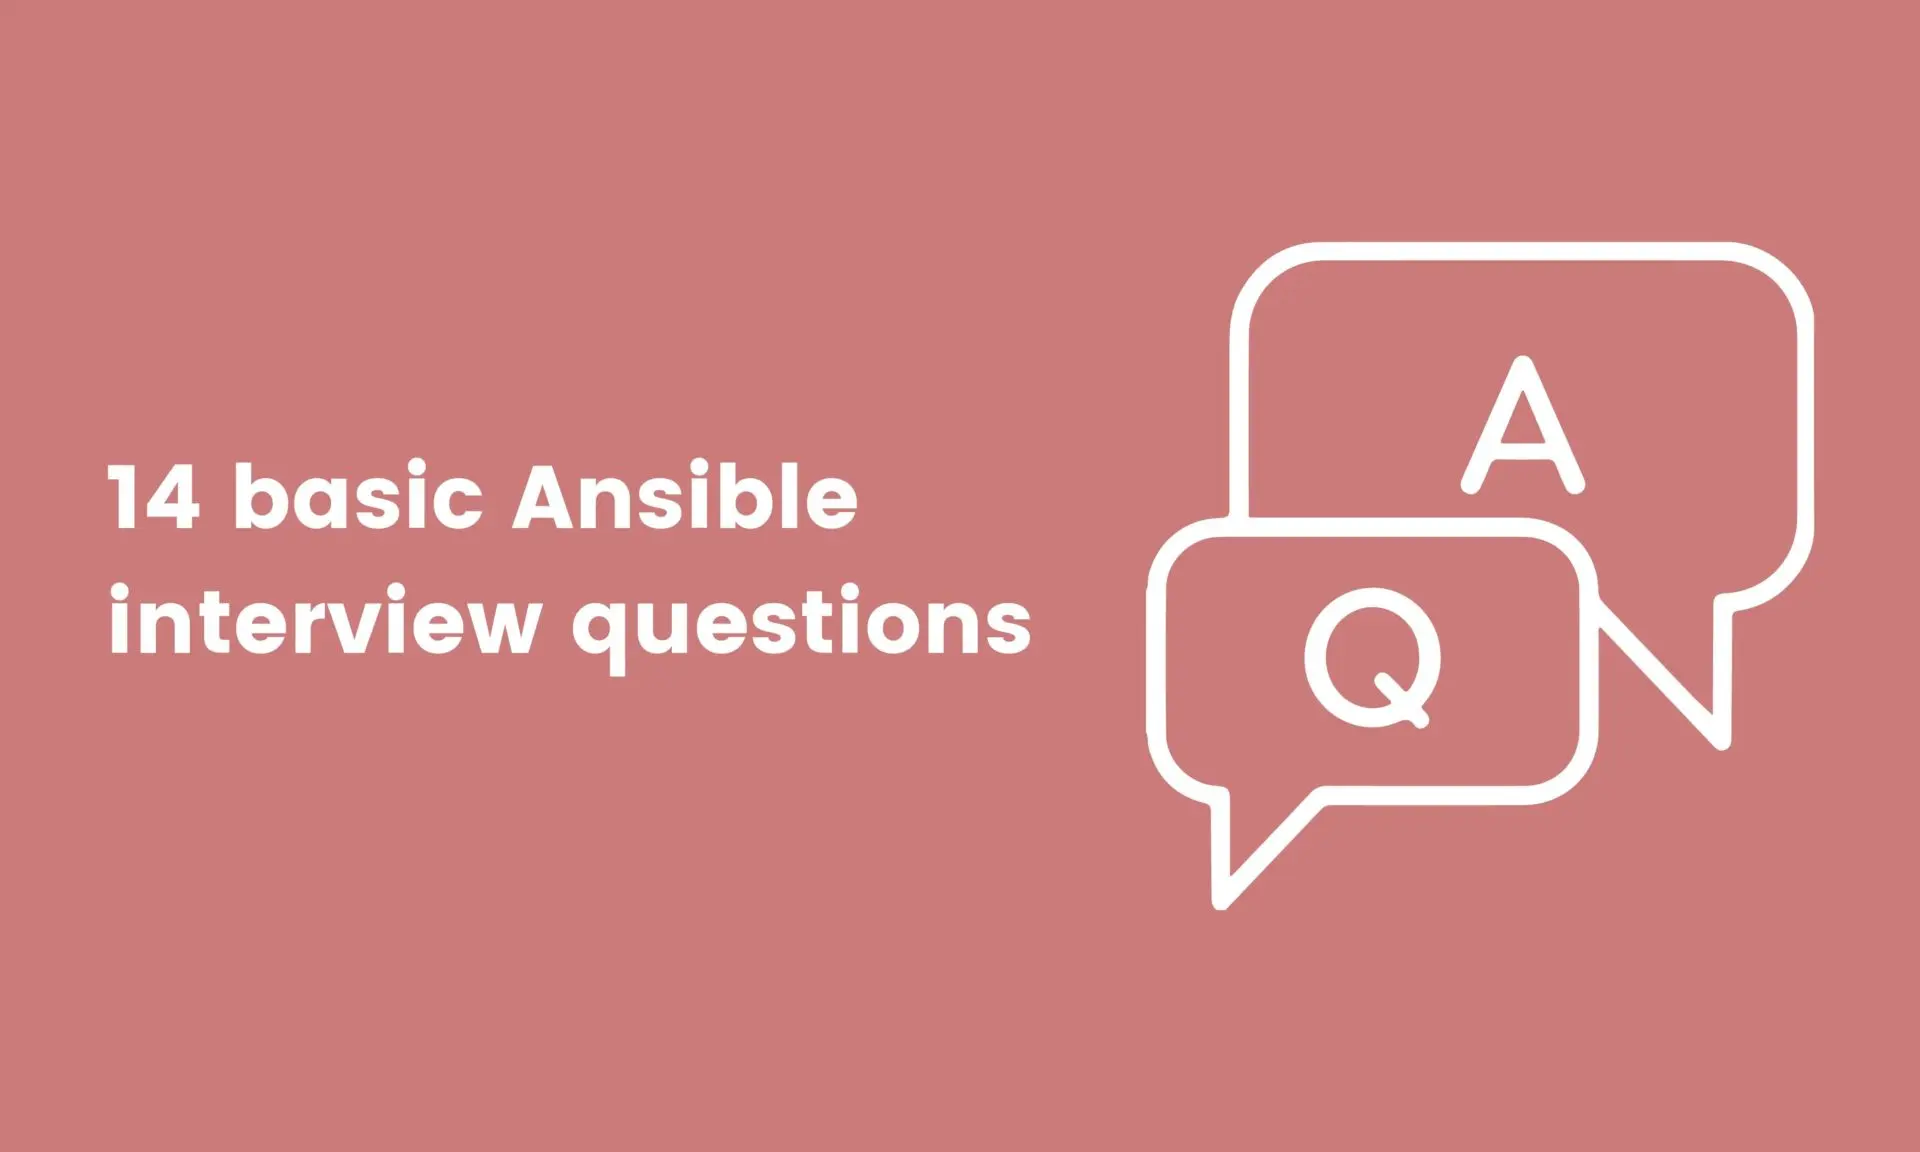 14 basic Ansible interview questions 